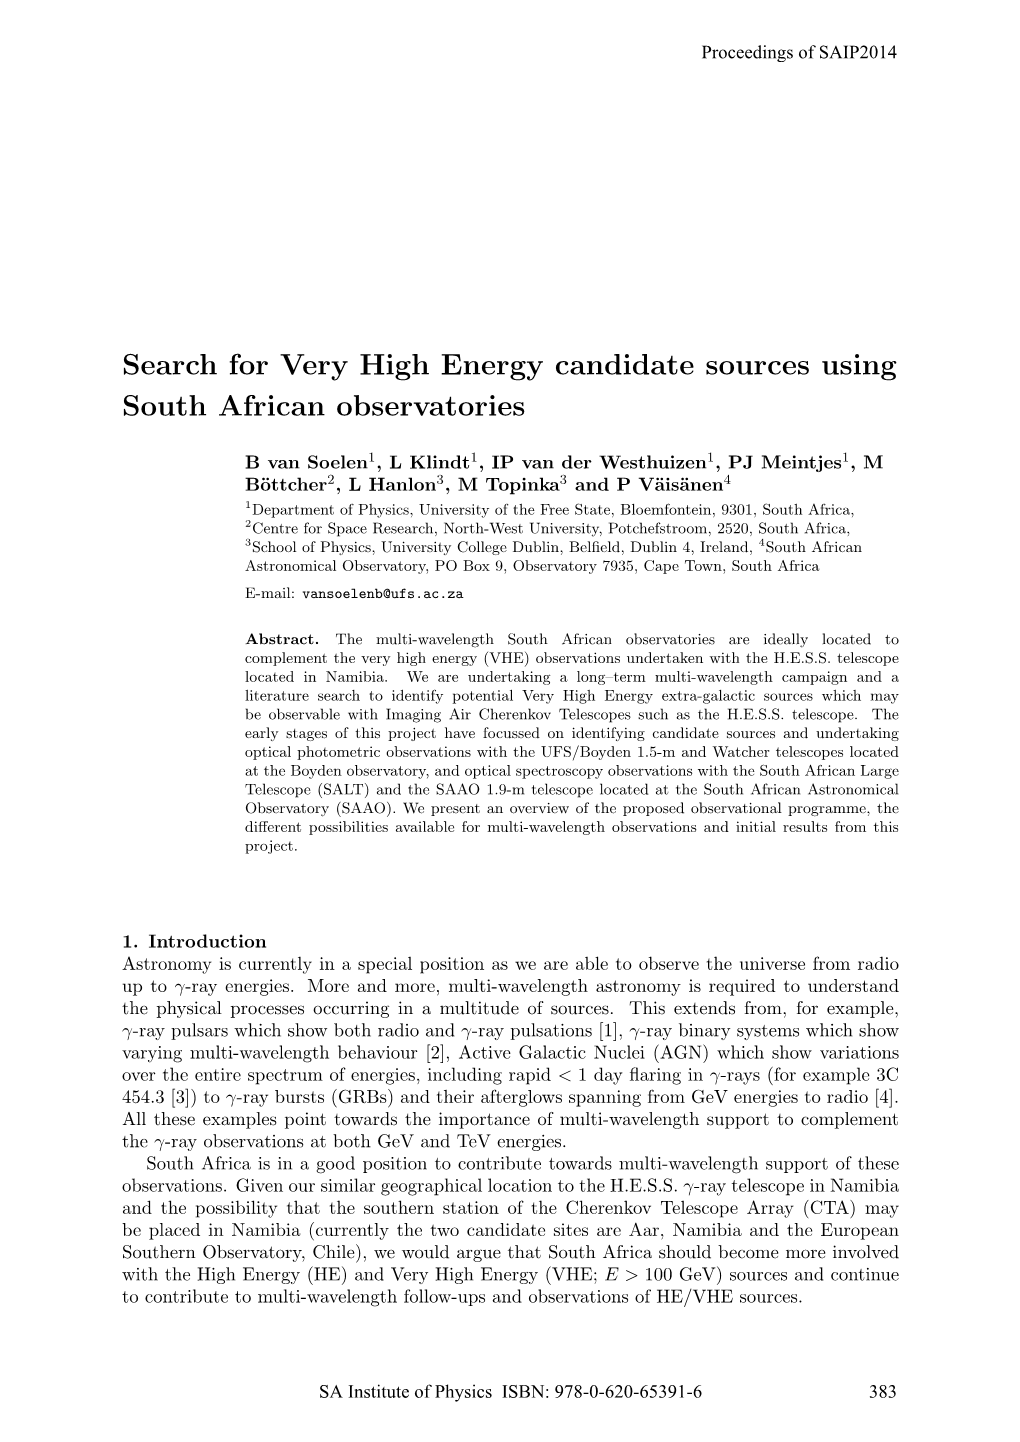 Search for Very High Energy Candidate Sources Using South African Observatories